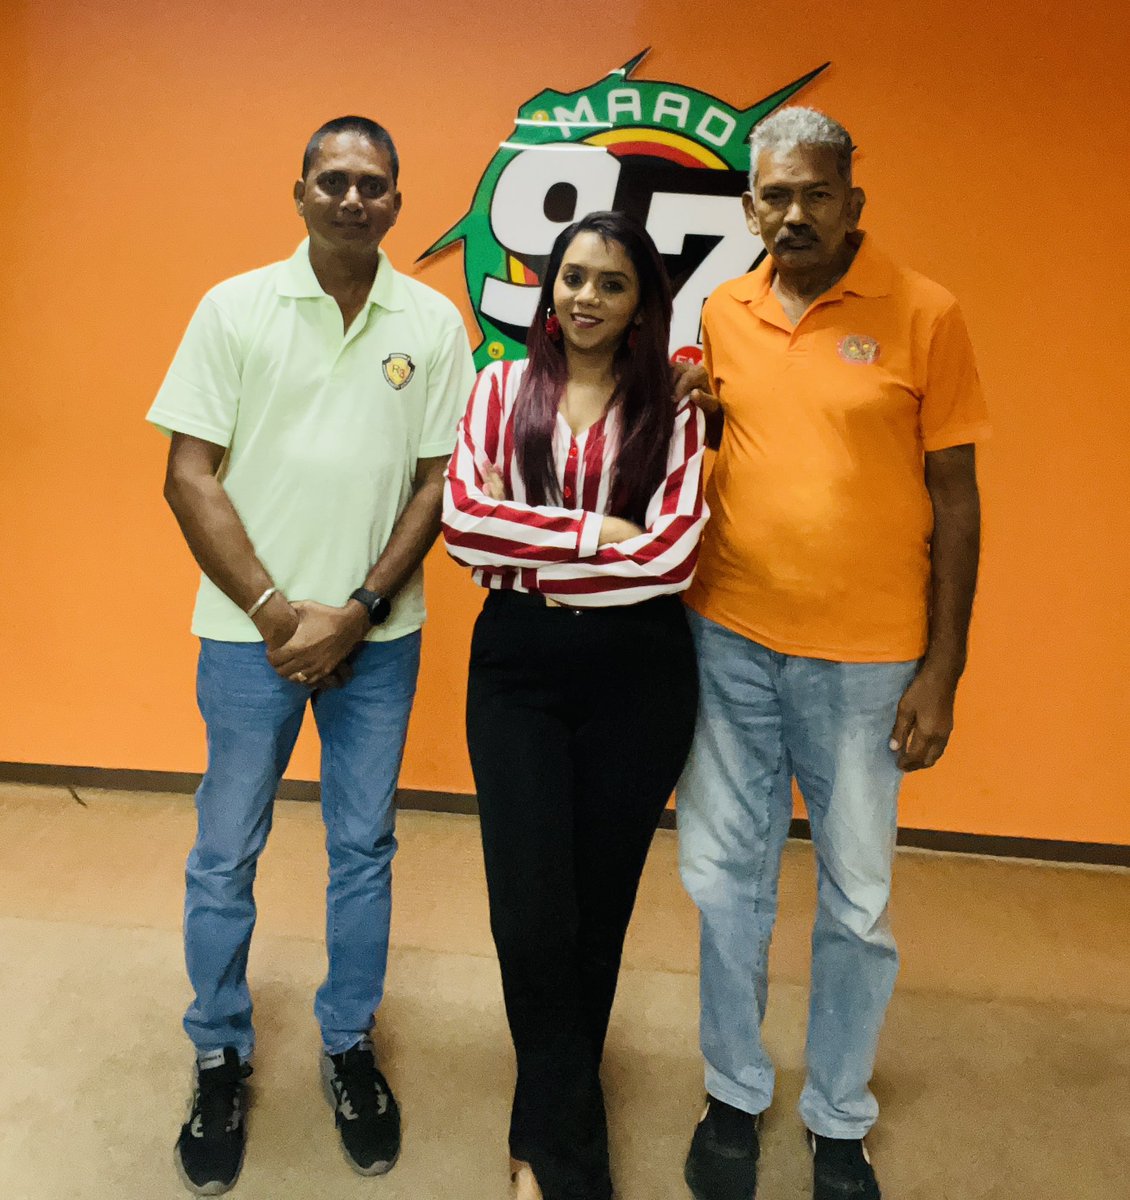 The first of many collaborations with Reg 3 Road Safety  Council members - Peter Kathanann and Bhym Sarran. 

Do join us for the next session!! 

#roadsafety #radiohost #promotinghealthyconversations